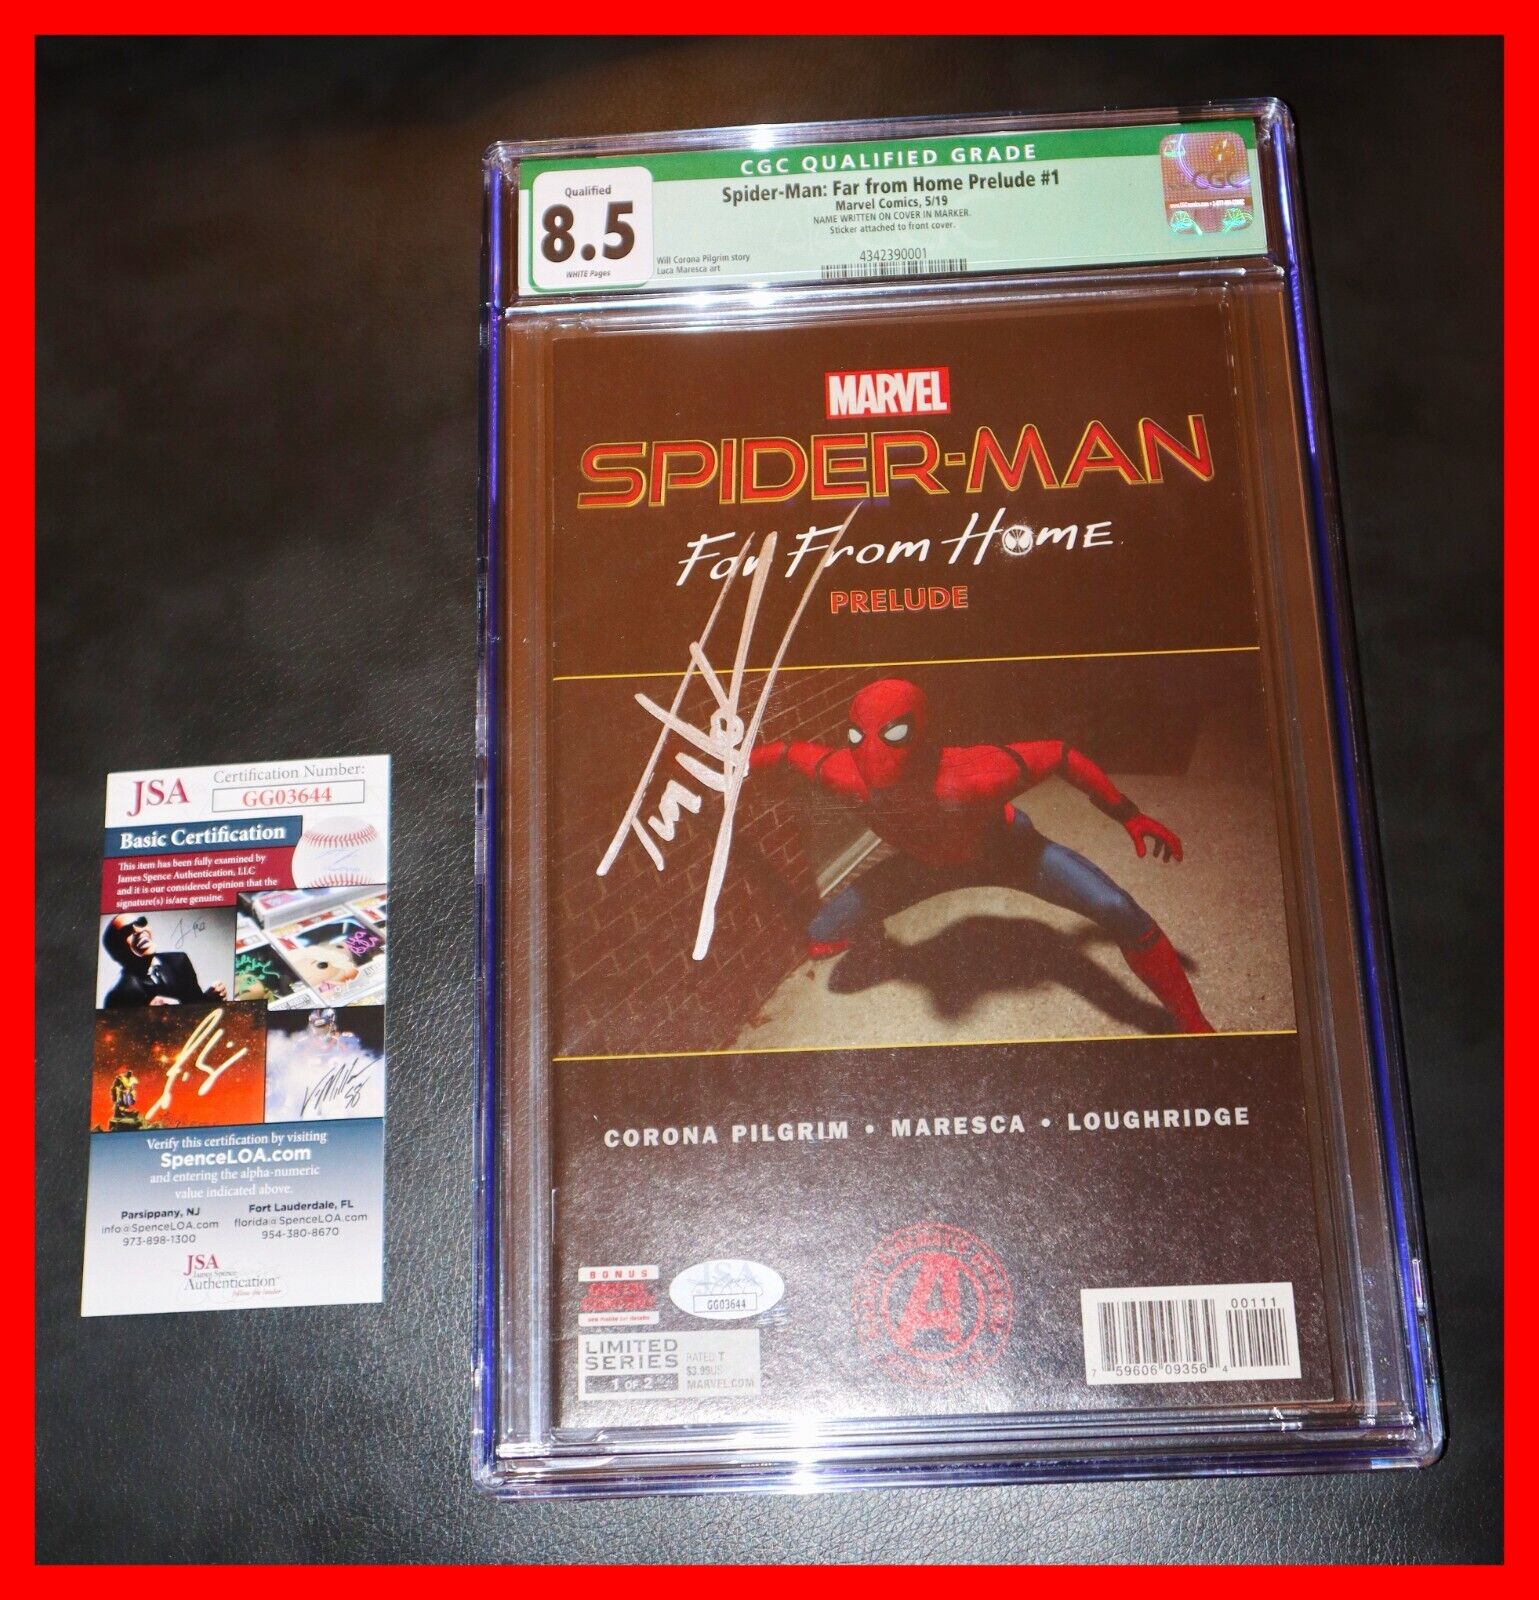 🔥 Spiderman Far From Home Prelude #1 CGC 8.5 TOM HOLLAND Signed Spider-Man JSA